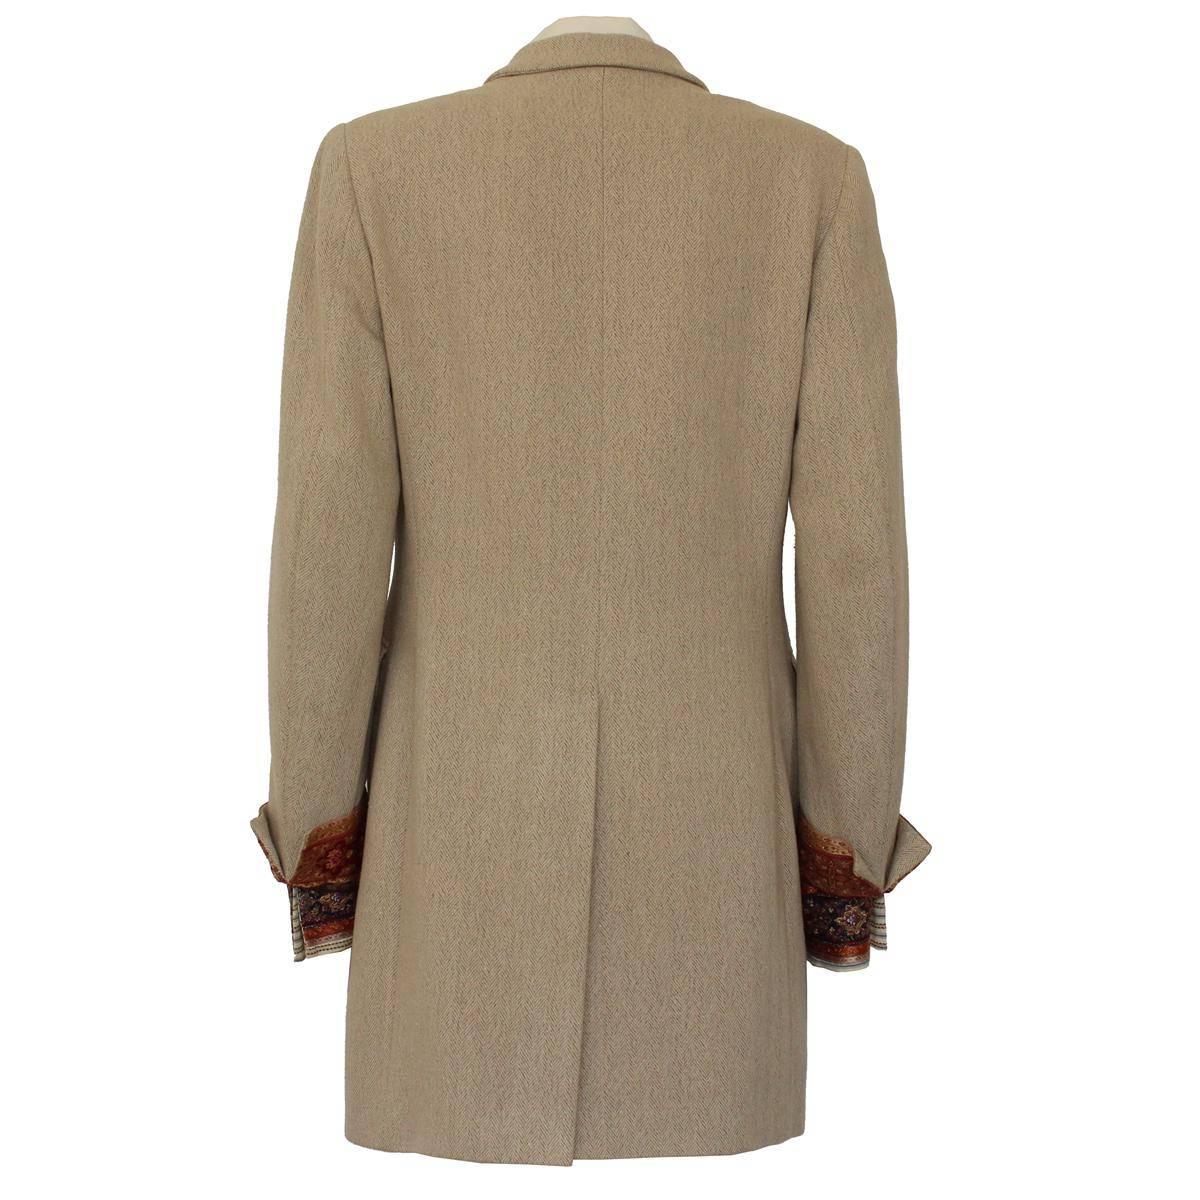 So beautiful Barbara Bui vintage suit
Overcoat
Wool blend
Beige color
4 pockets
3 buttons closure
Precious silk embroidery cuffs
38 french size (42 italian)
Total lenght from shoulder cm 80 (31.5 inches)

Shirt
Cotton
Beige color
Fine worked